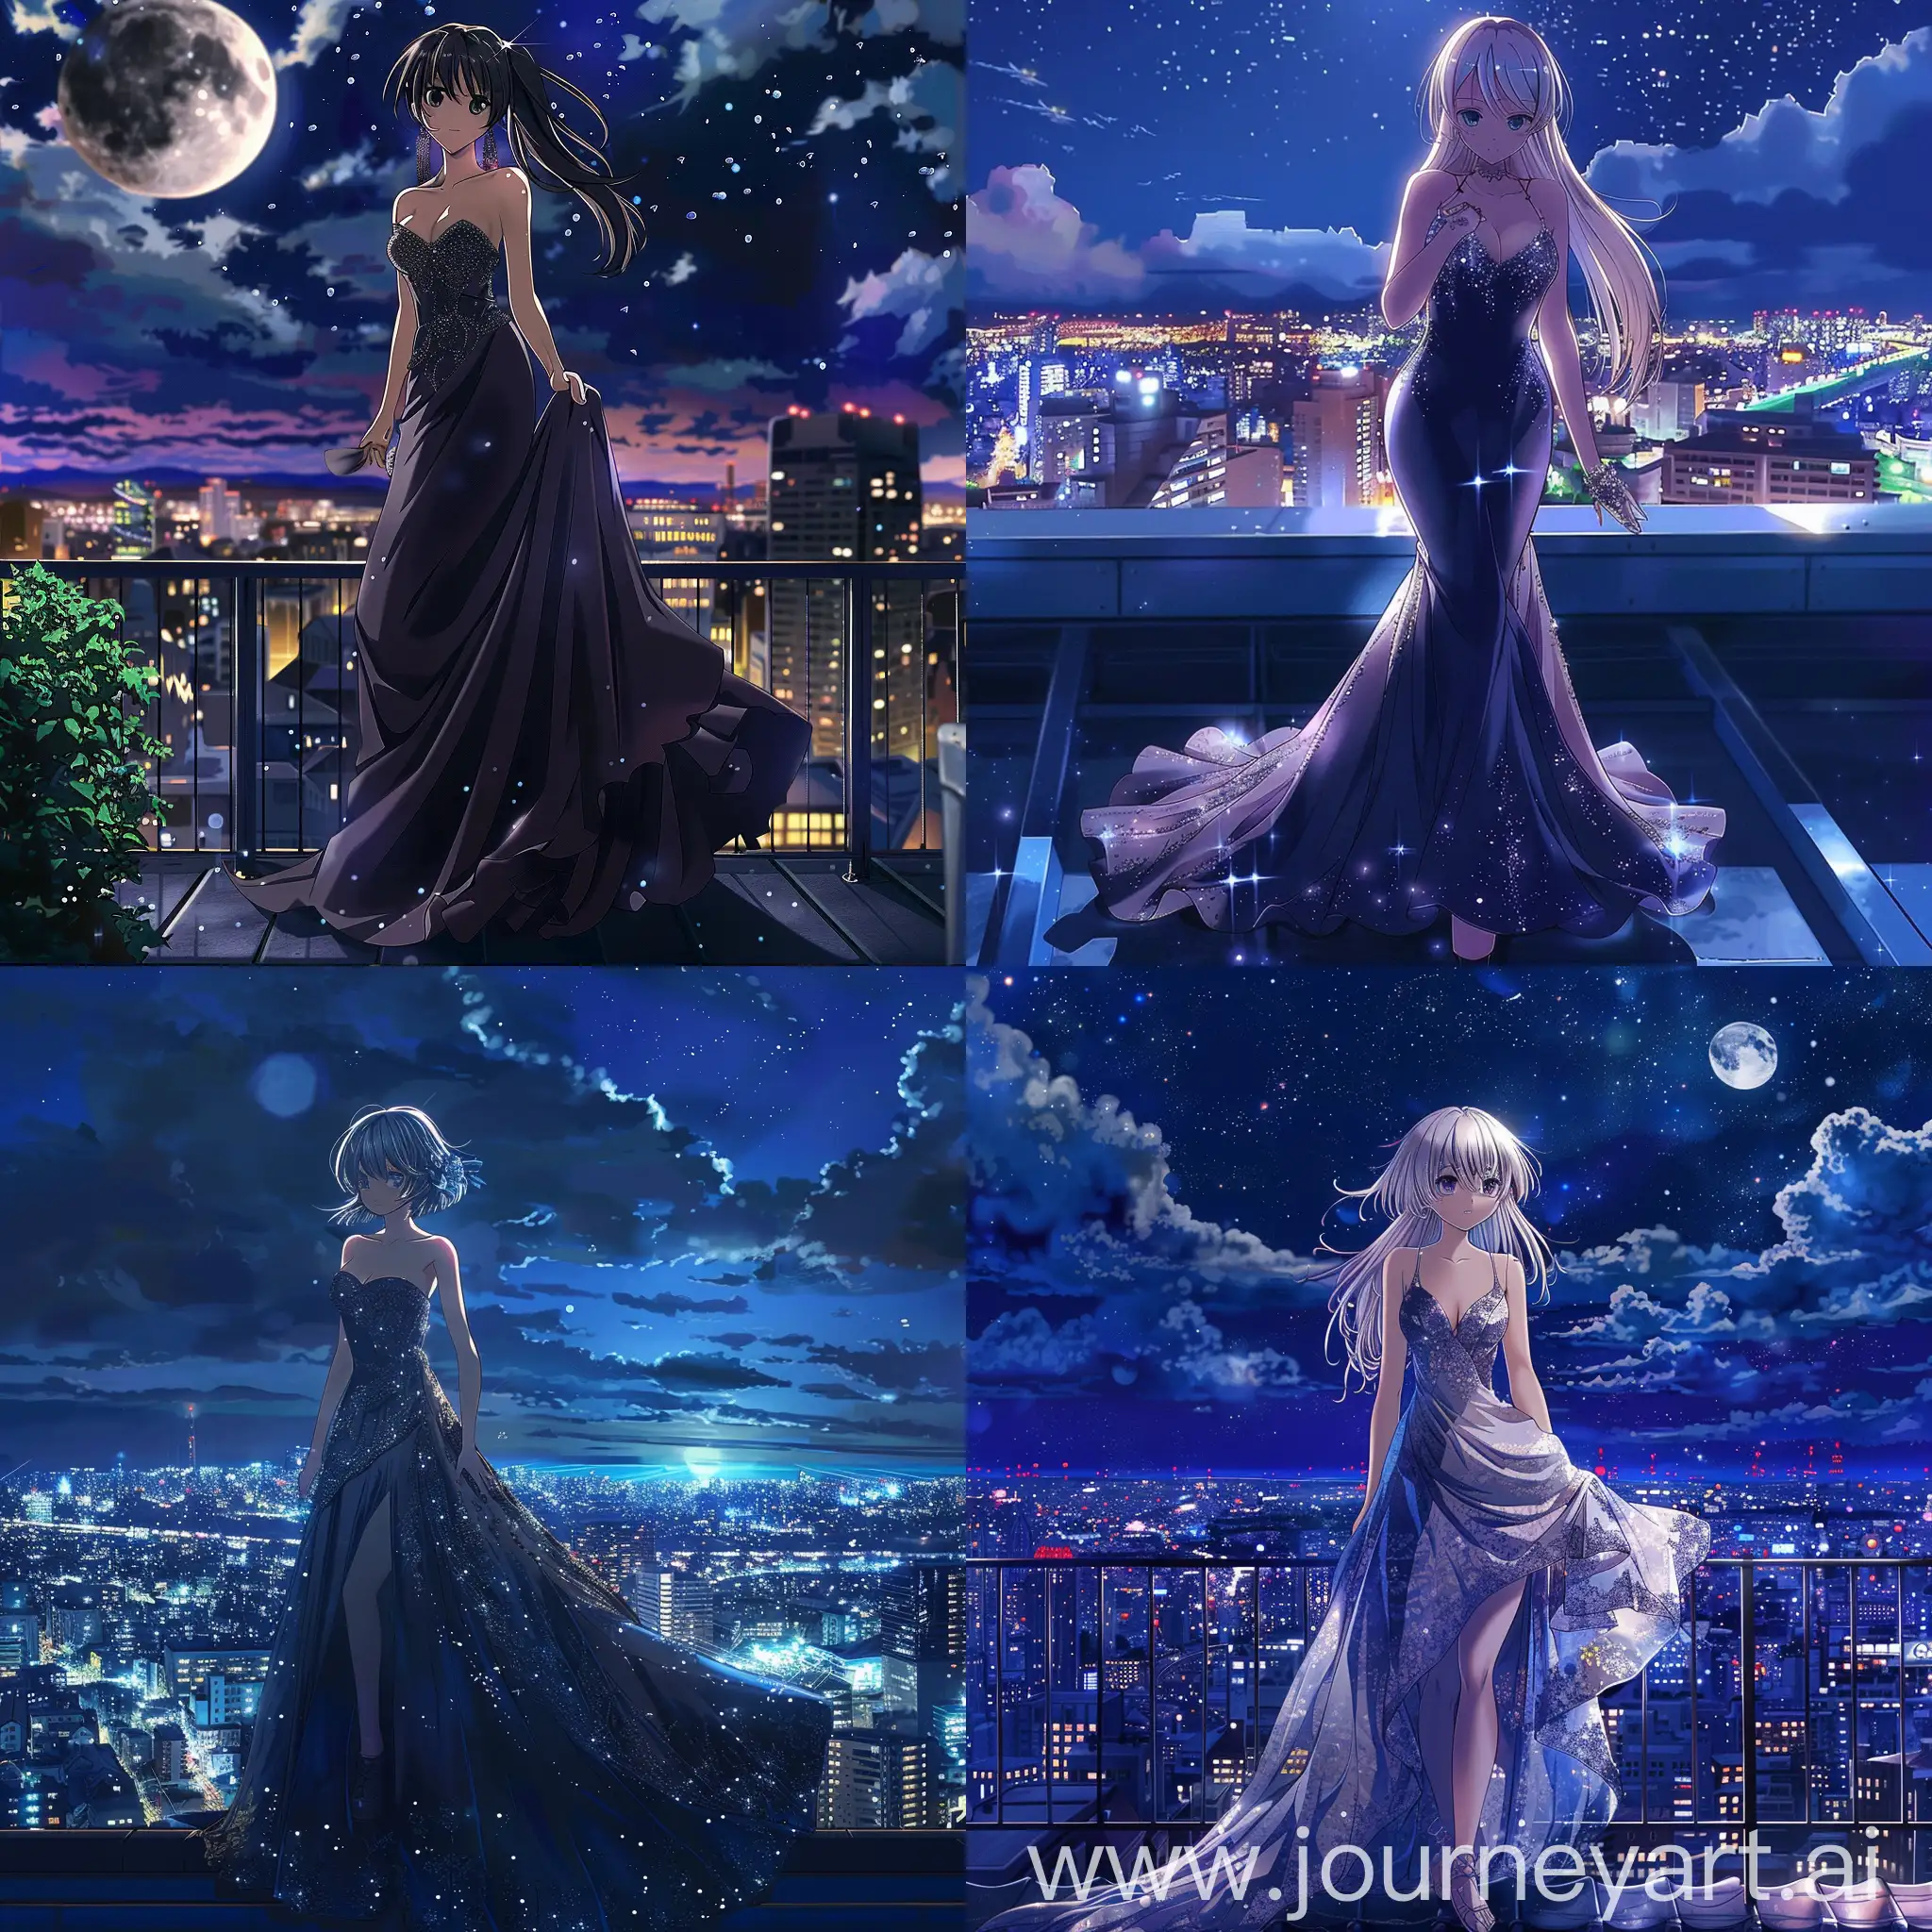 Elegant-17YearOld-Anime-Girl-in-Evening-Gown-Stands-on-Night-City-Rooftop